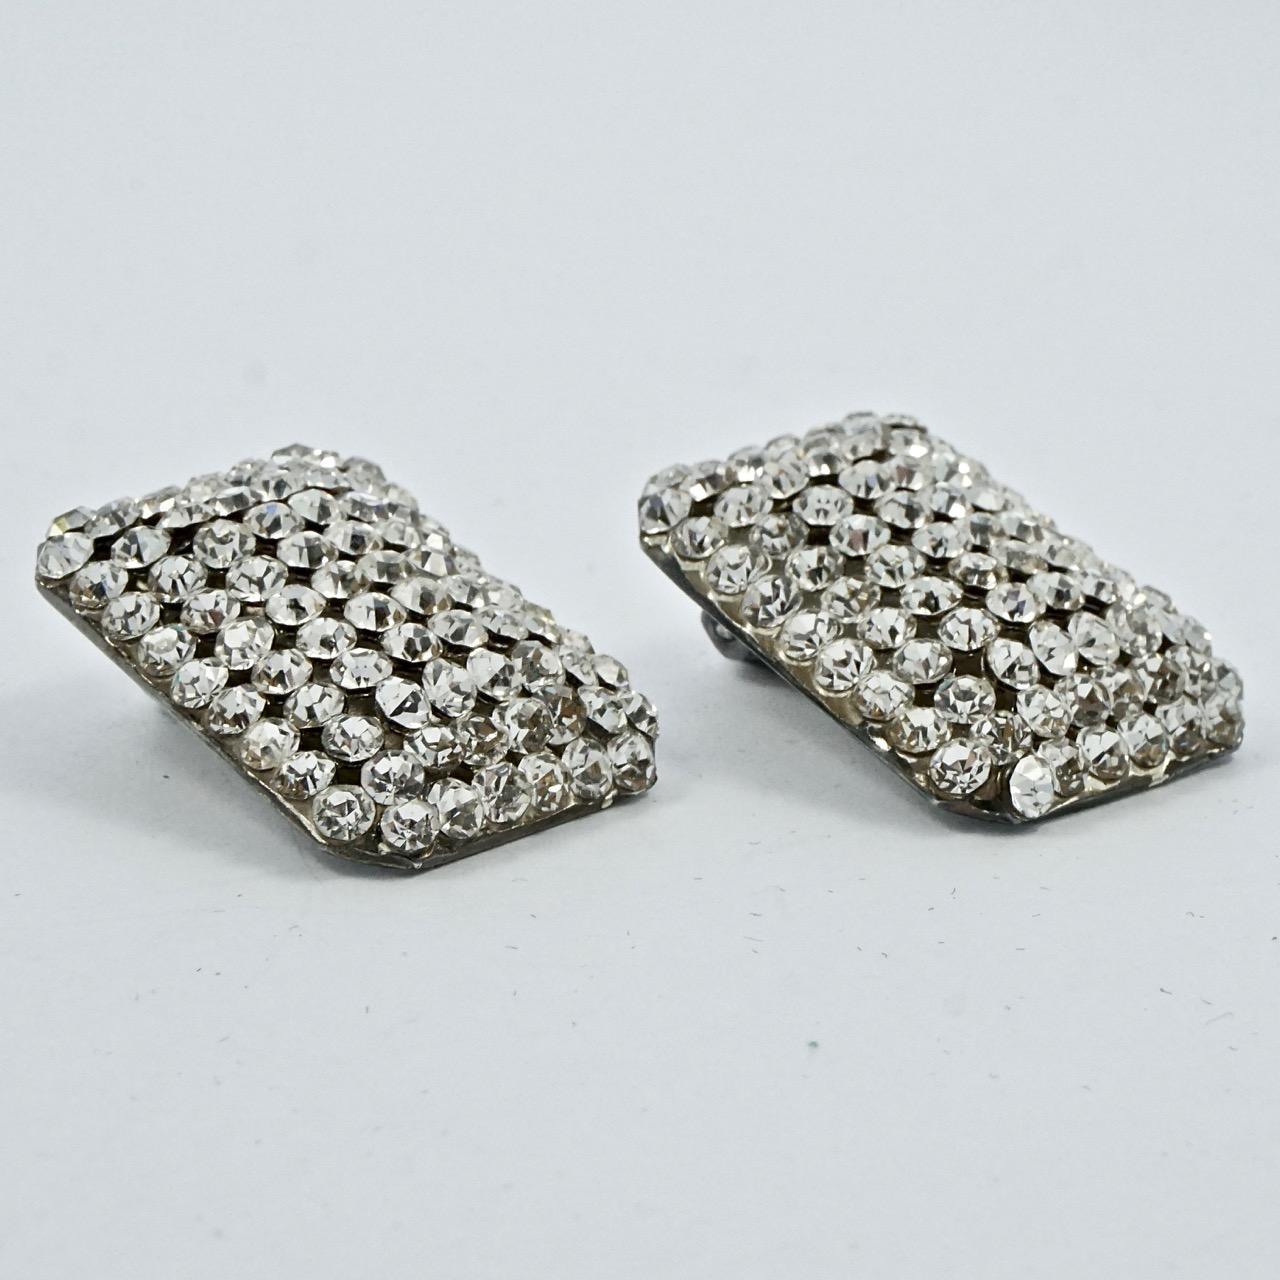 
Italian beautiful Idemaria silver plated and clear rhinestone pavé clip on earrings. These rectangular earrings measure length 2.8cm / 1.1 inches by 1.95cm / .77 inch. There is some wear to the silver plating.

This is a lovely vintage pair of